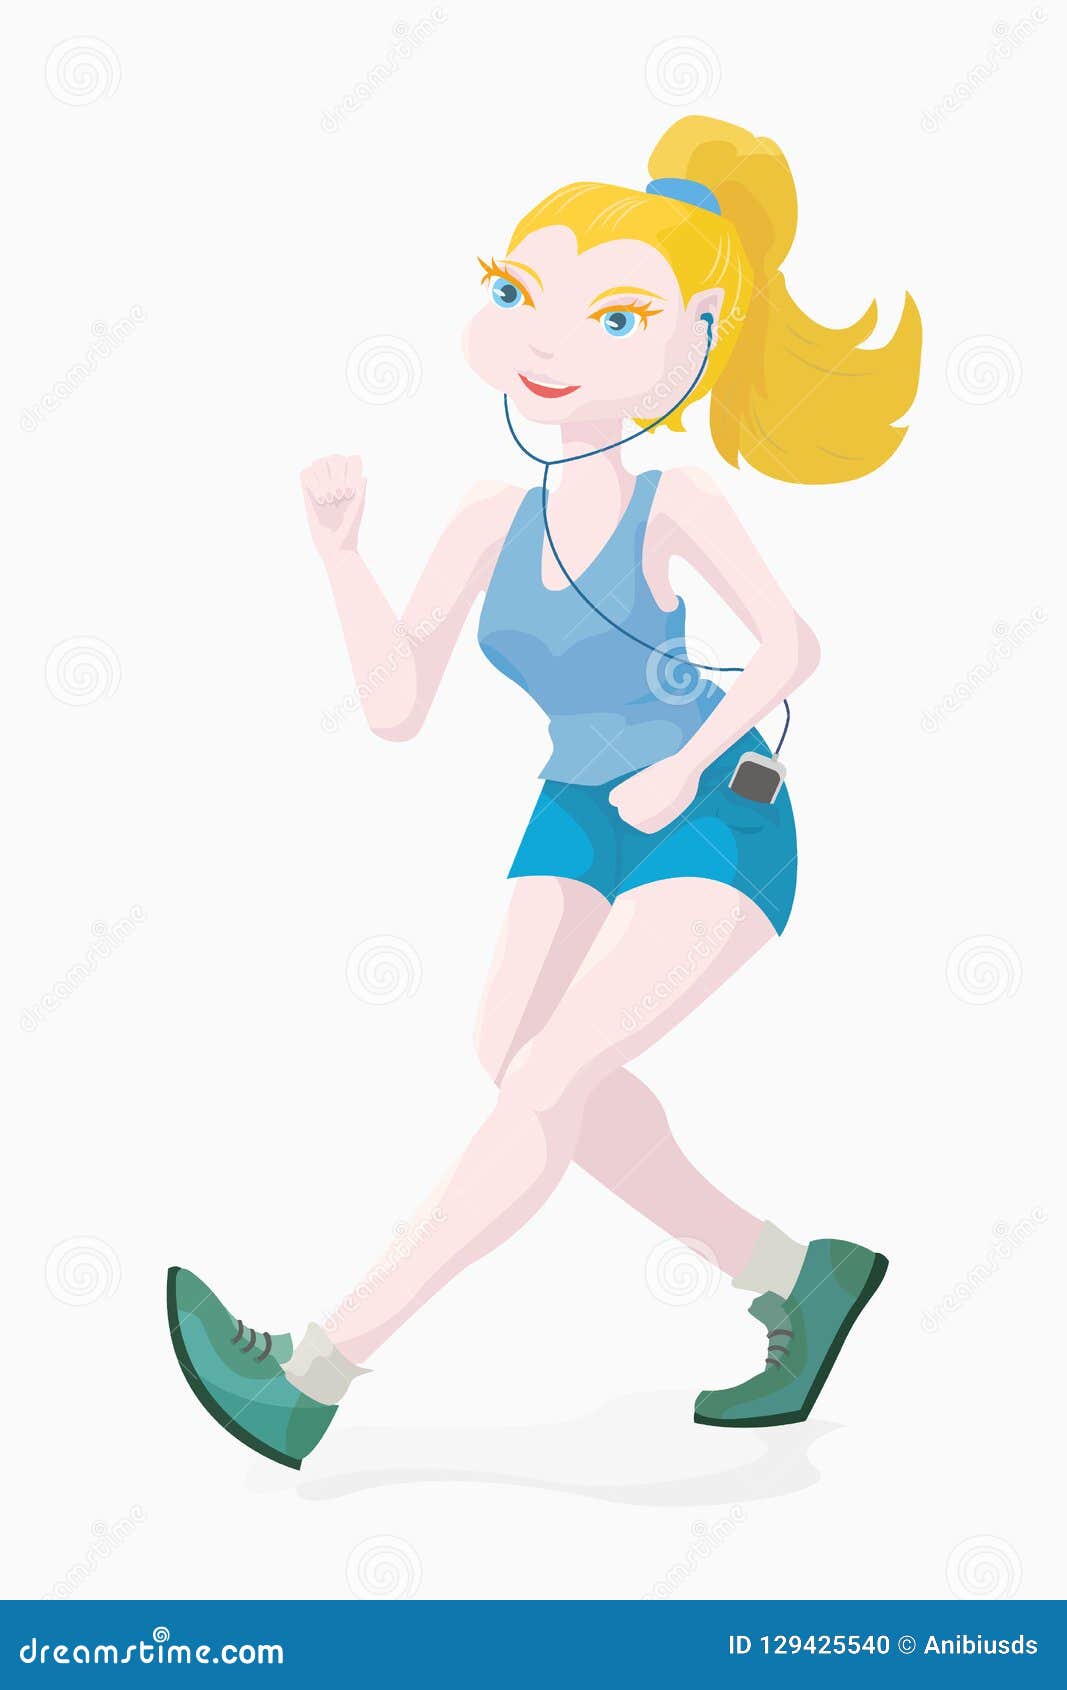 sports character in the form of a blond girl in a blue t-shirt and mini shorts